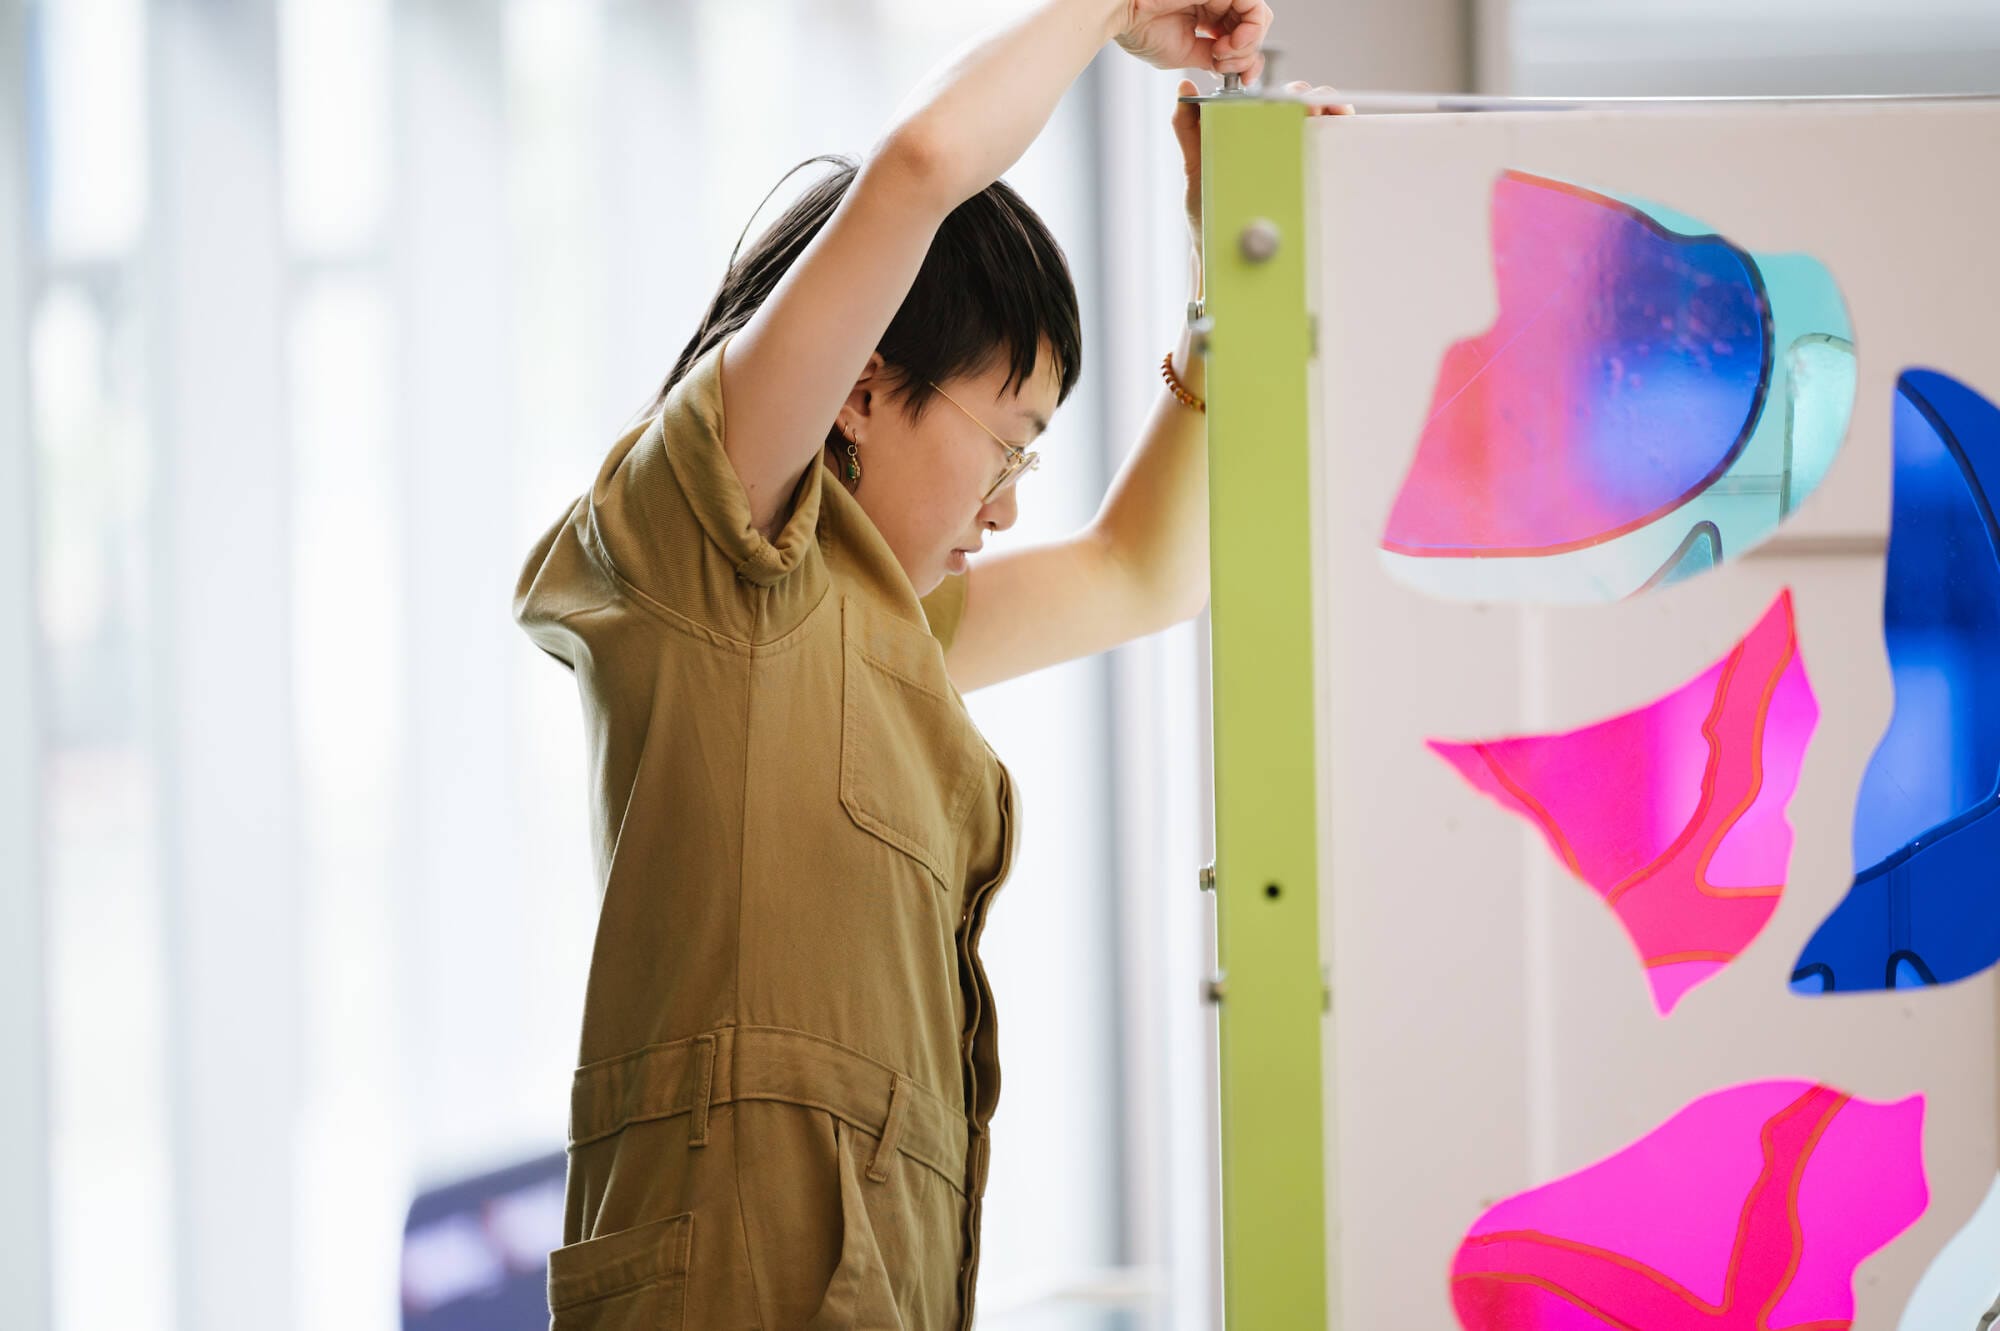 A woman installing a colorful piece of artwork